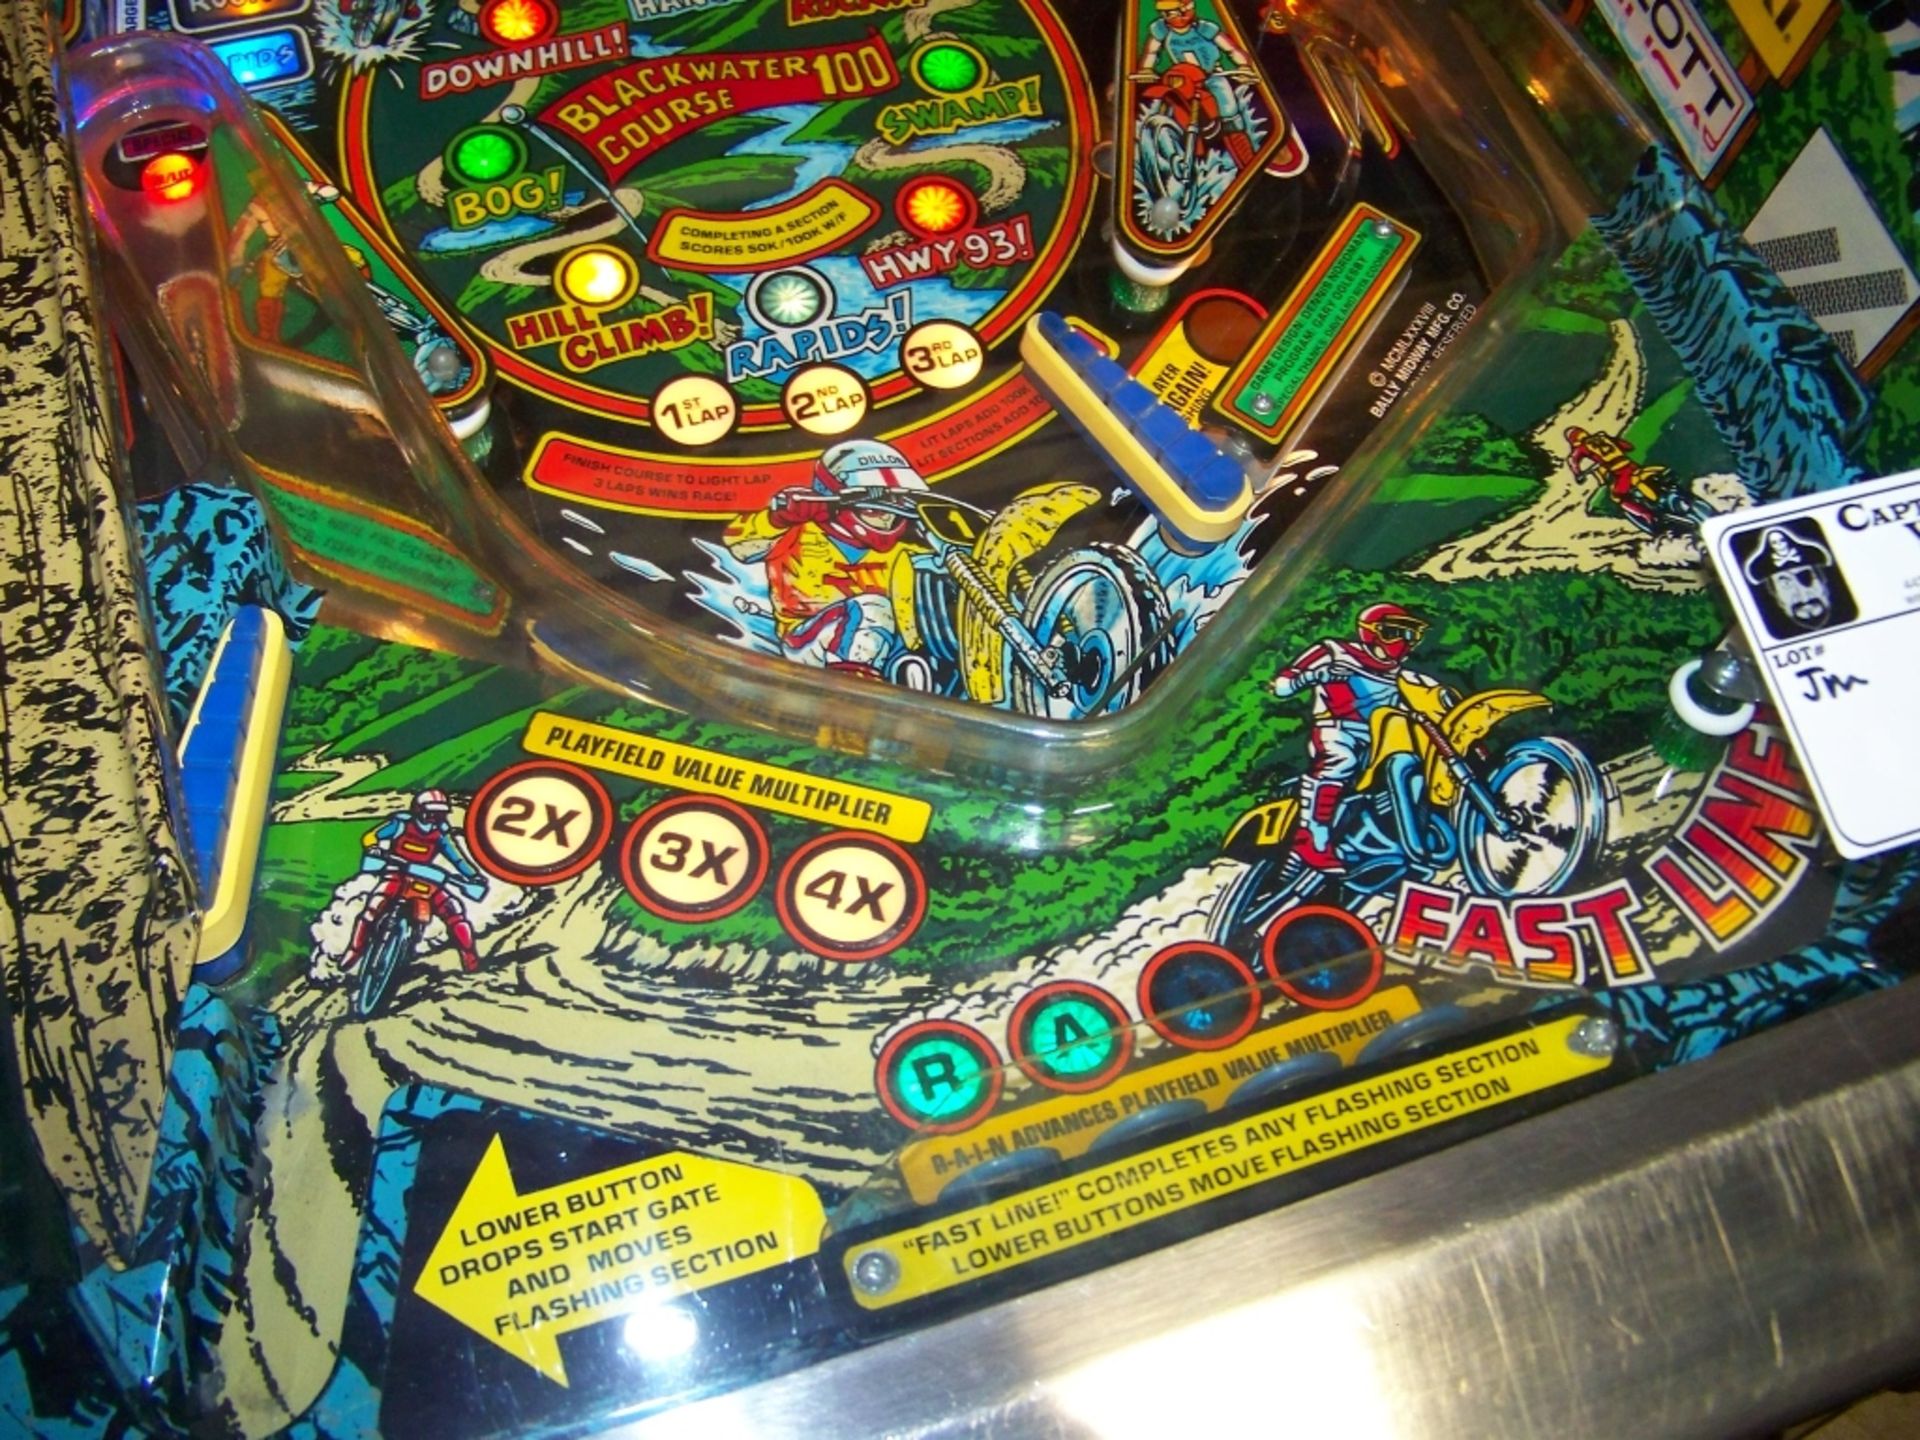 BLACKWATER 100 PINBALL MACHINE BALLY 1988 Item is in used condition. Evidence of wear and commercial - Image 10 of 10